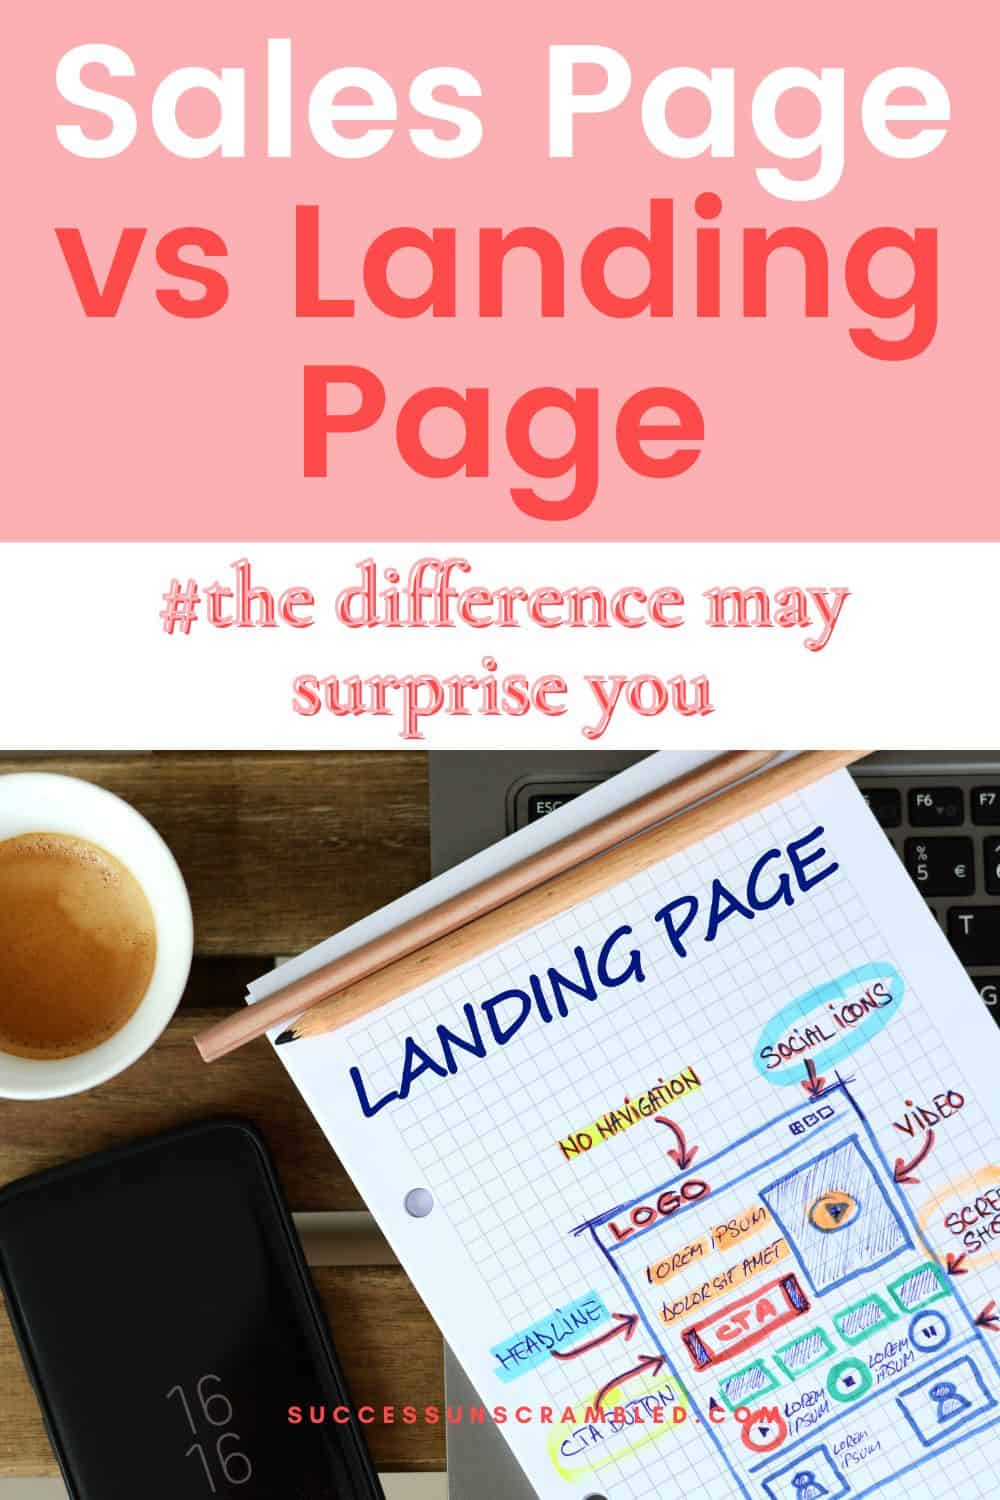 Image showing the common elements of a landing page